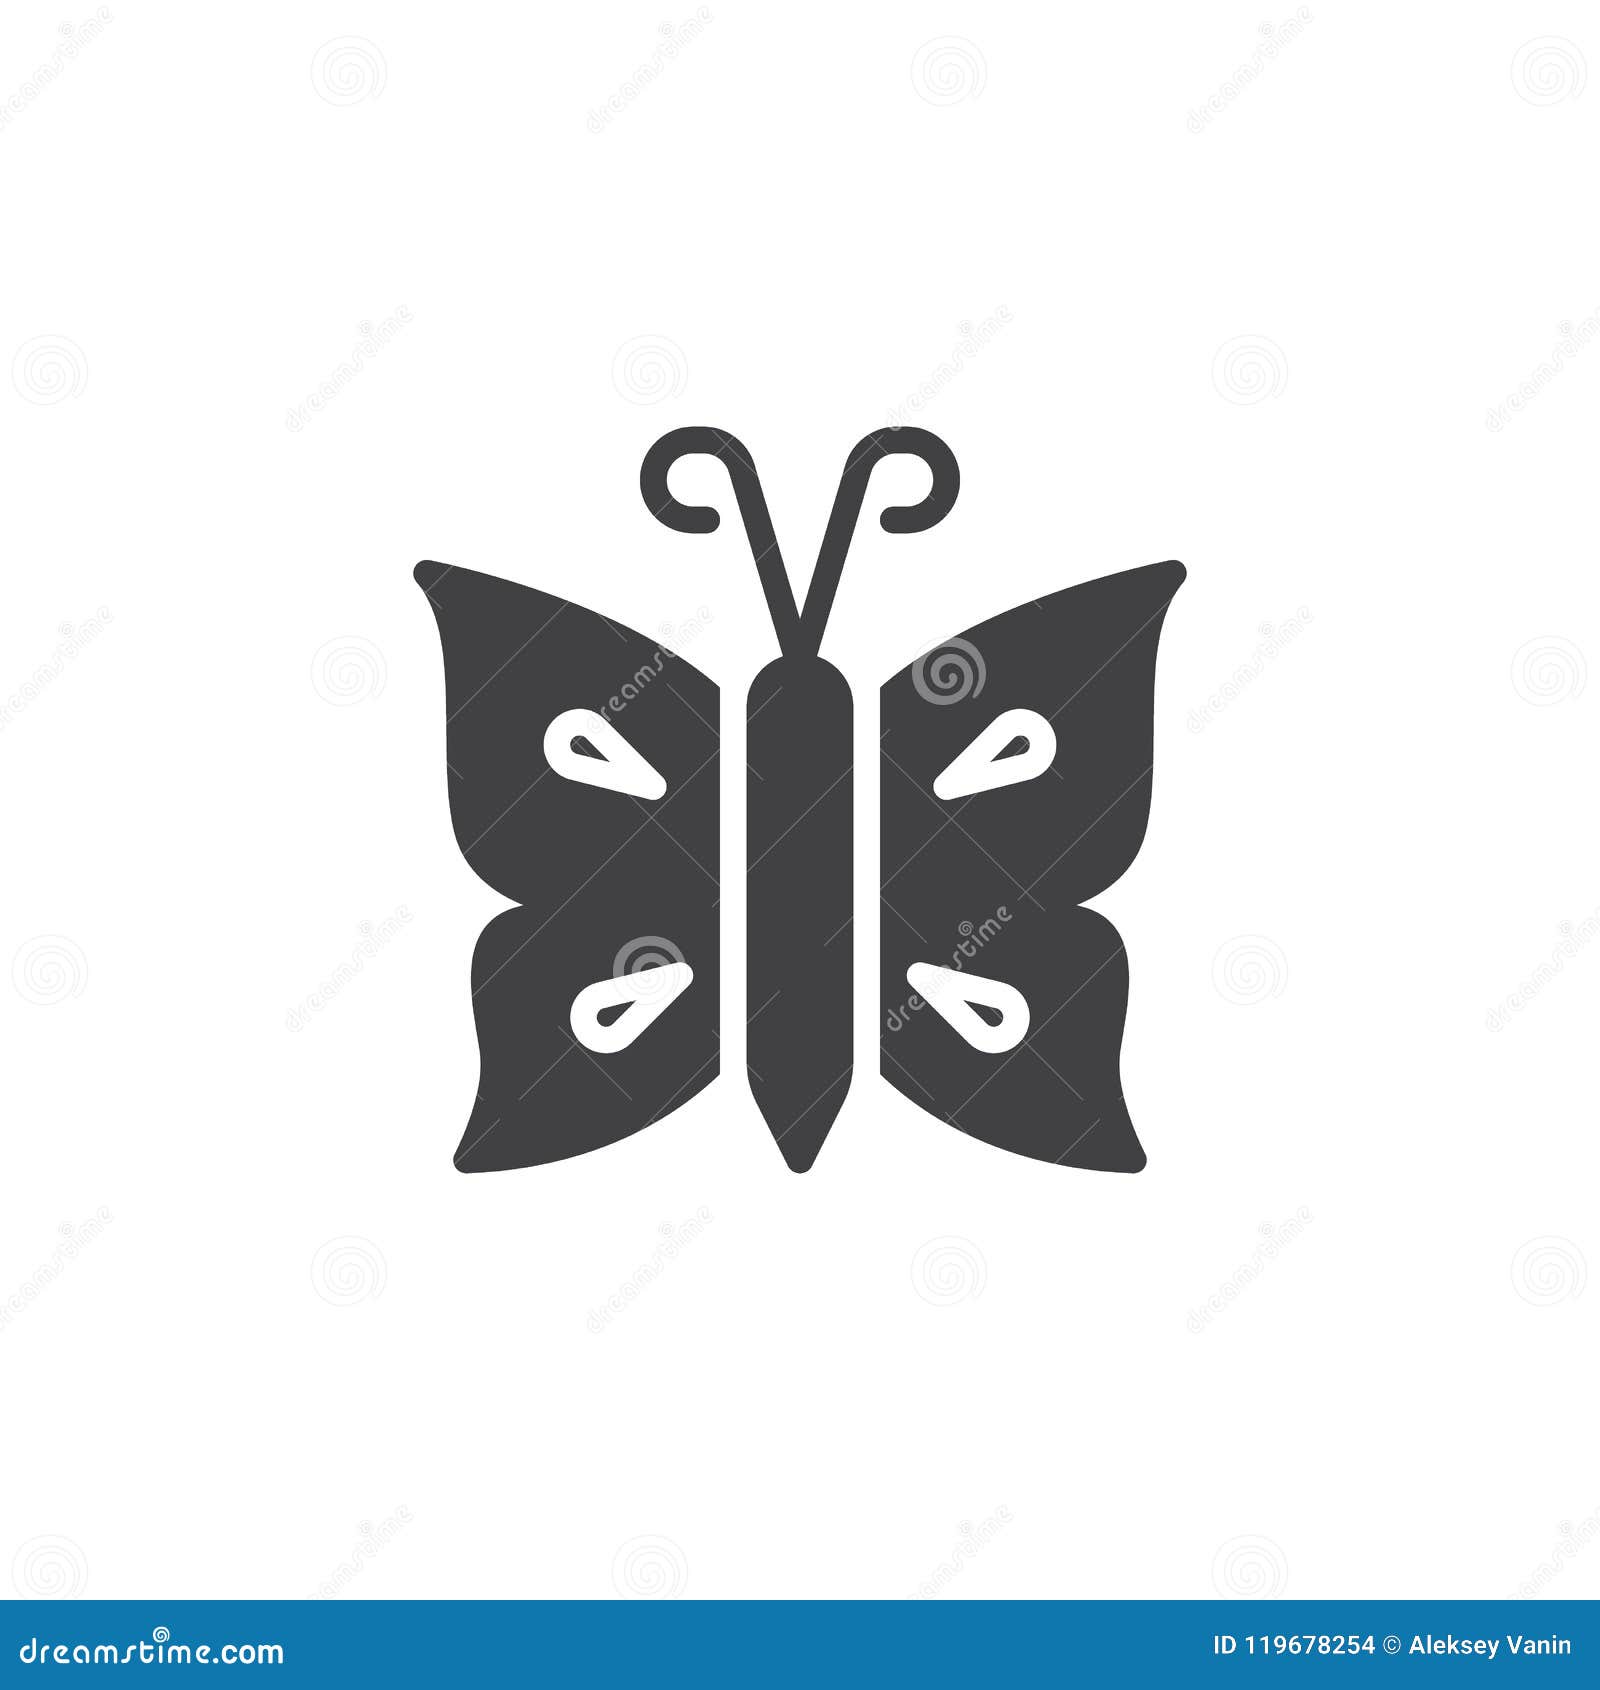 Butterfly with Antenna Vector Icon Stock Vector - Illustration of